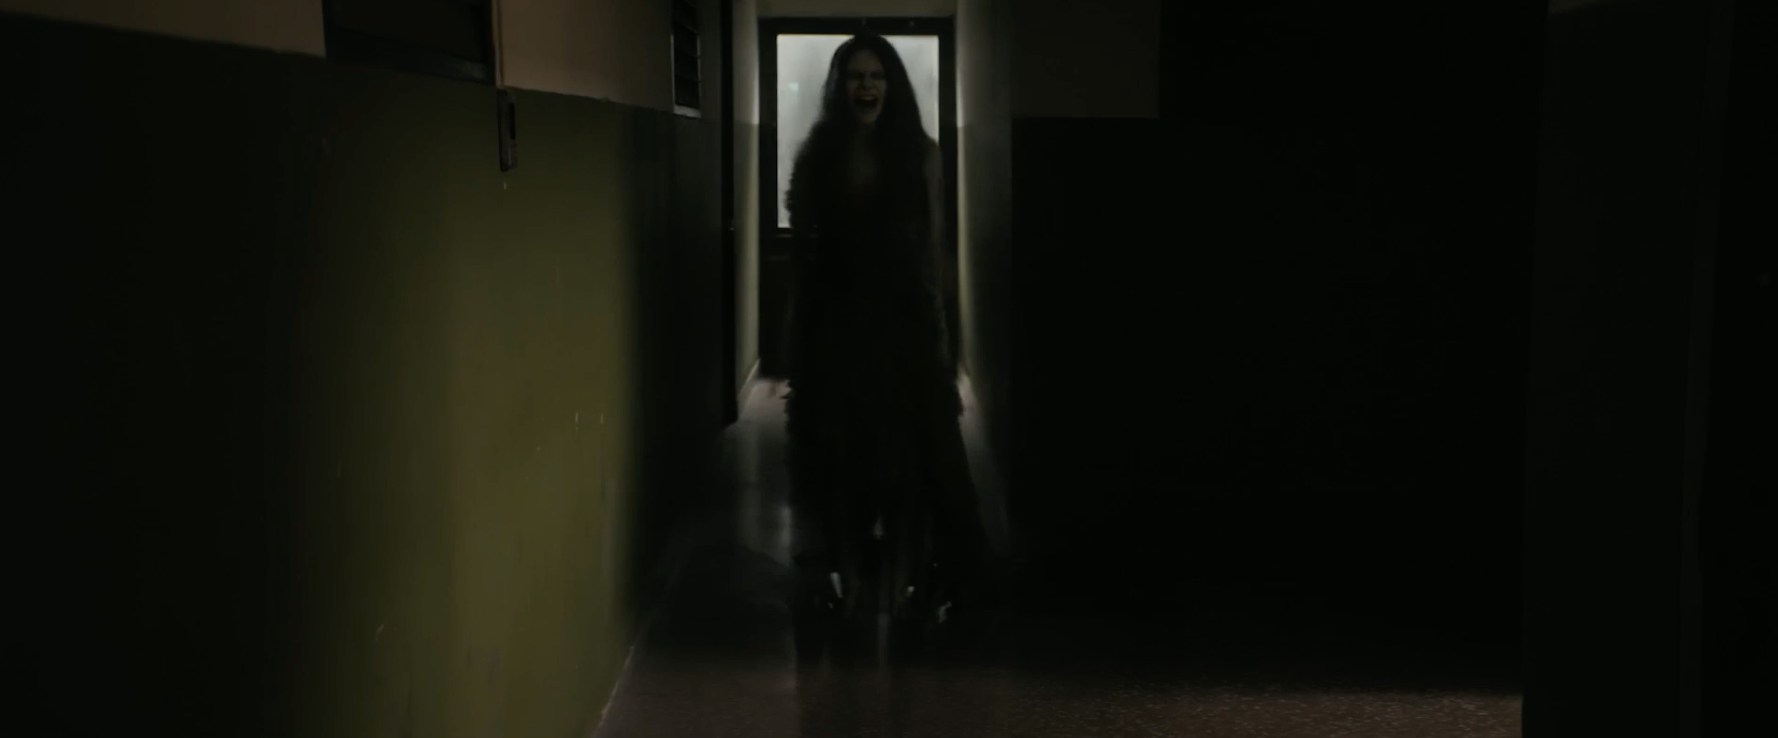 A person stands at the end of a dimly lit hallway, backlit by light from an open door, creating a shadowy and eerie effect